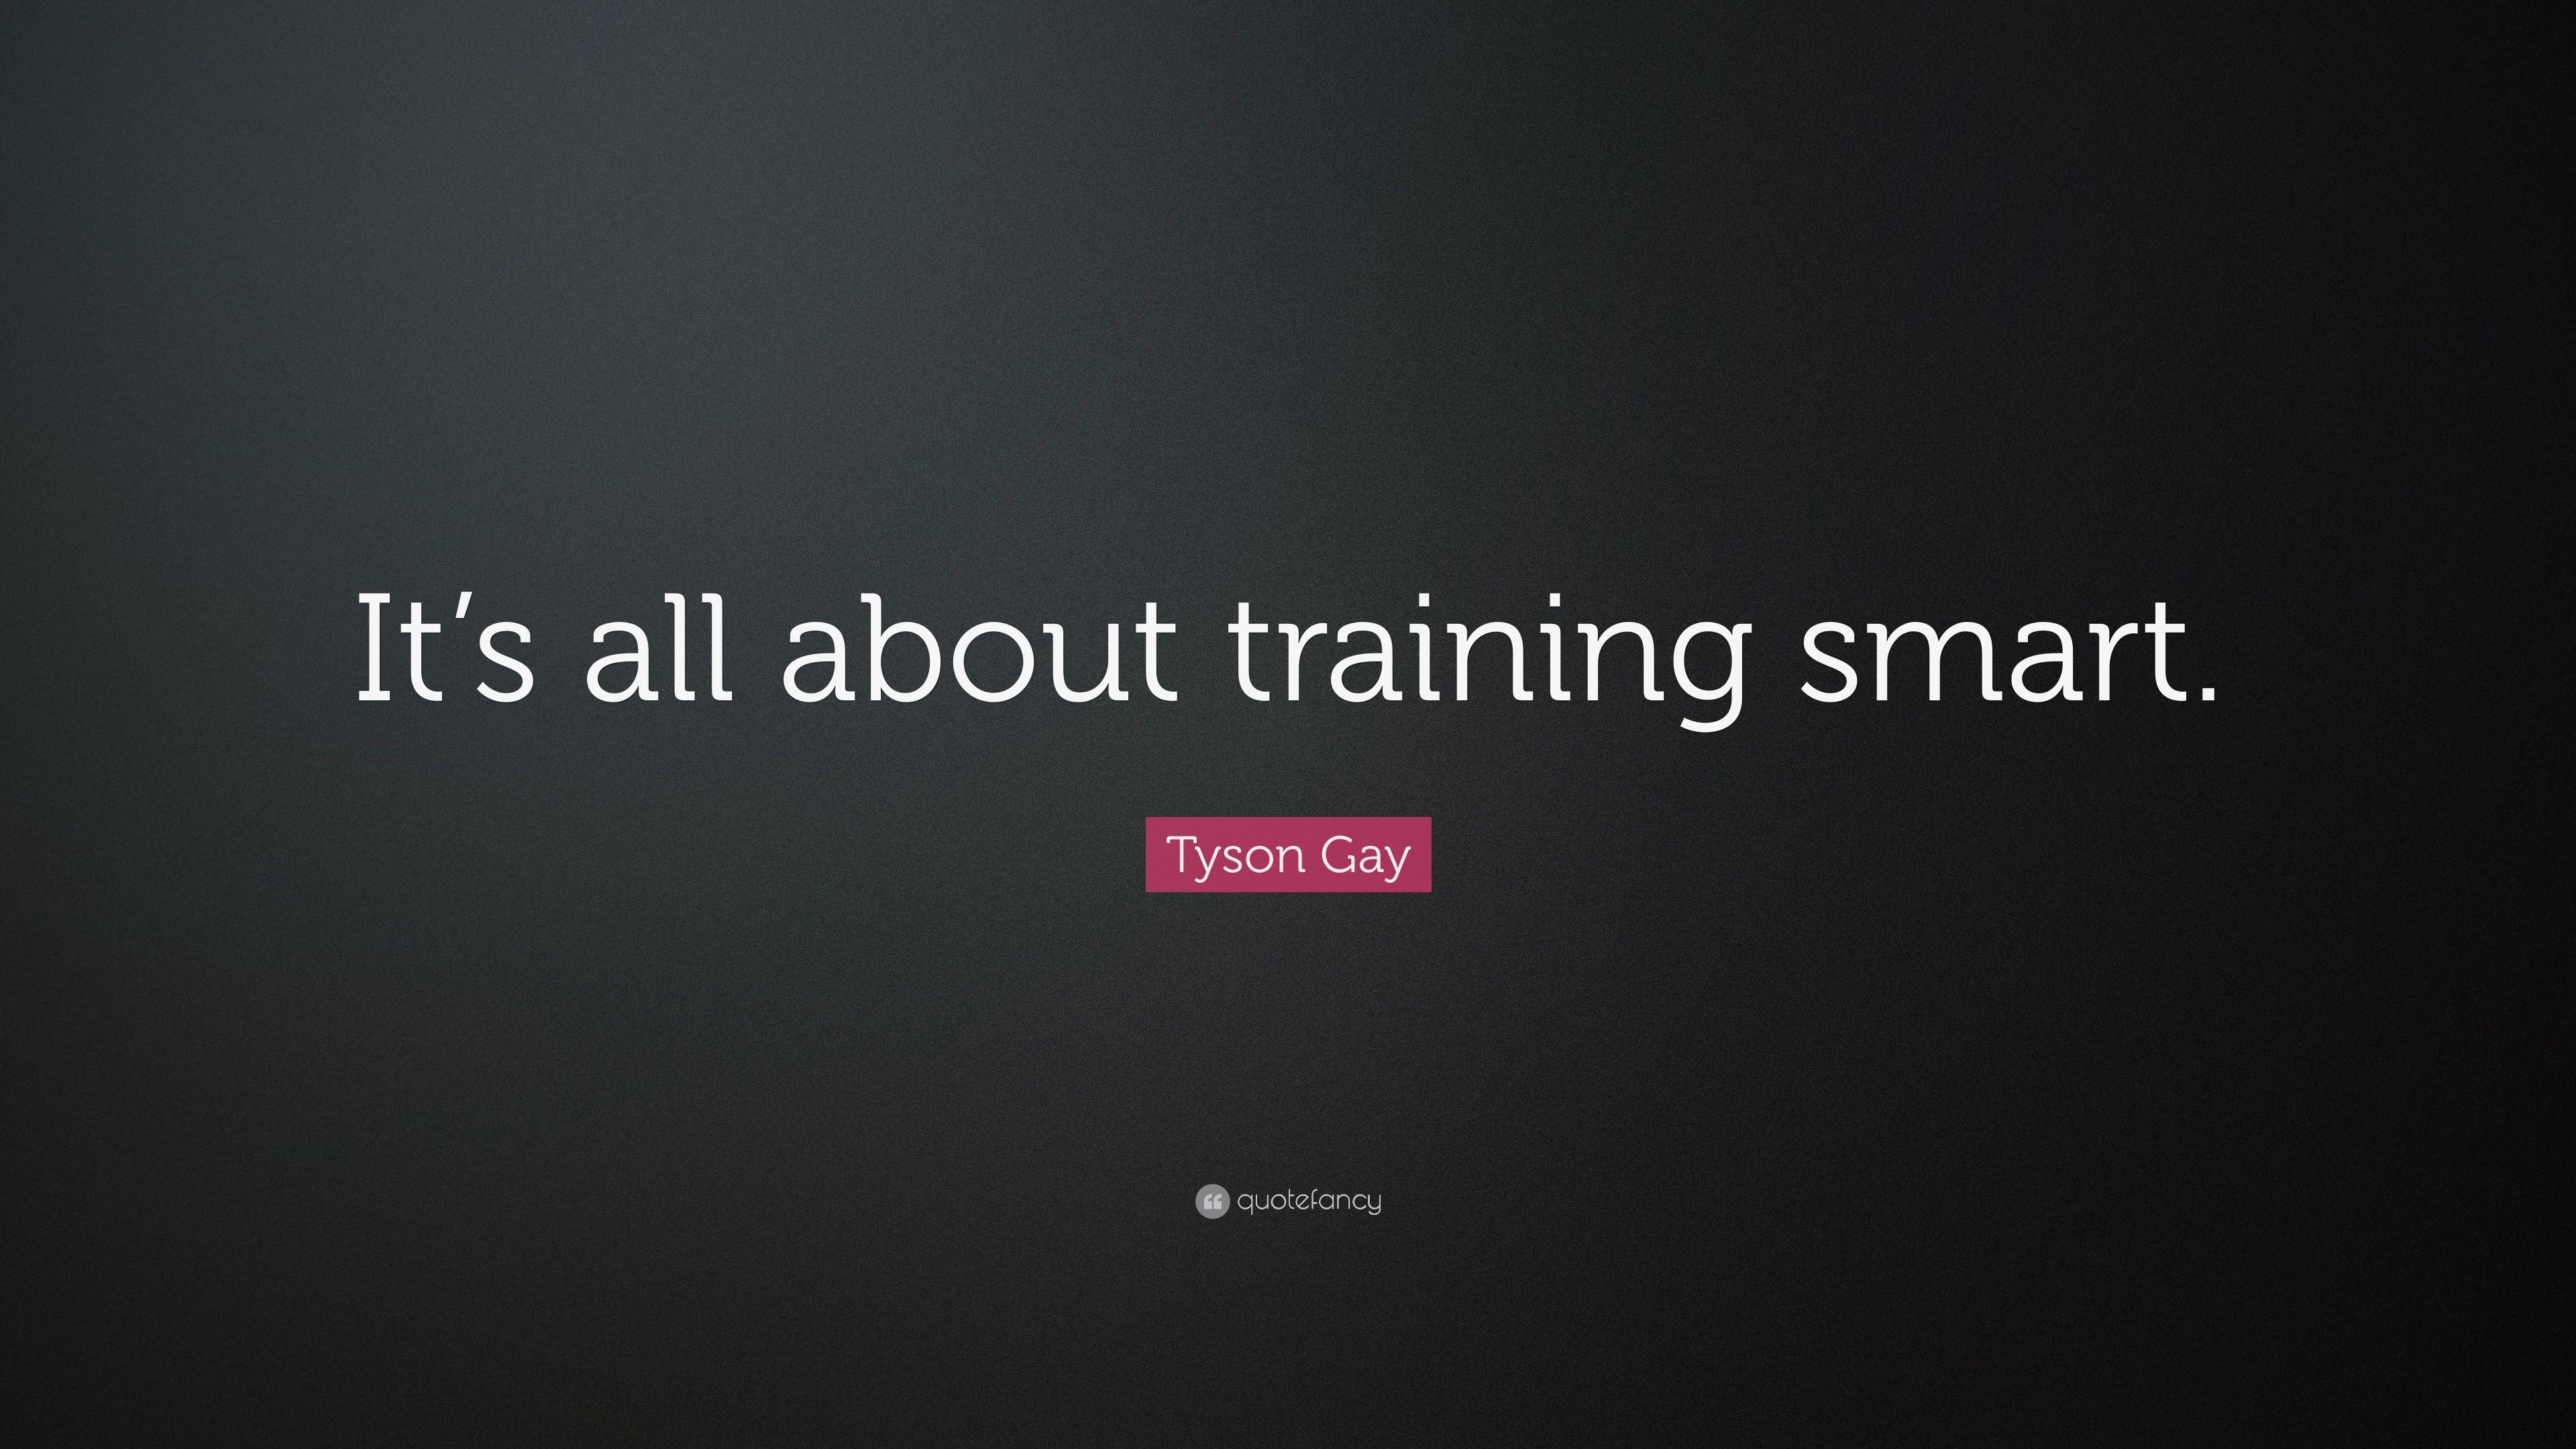 Tyson Gay Quote: “It's all about training smart.” 7 wallpaper